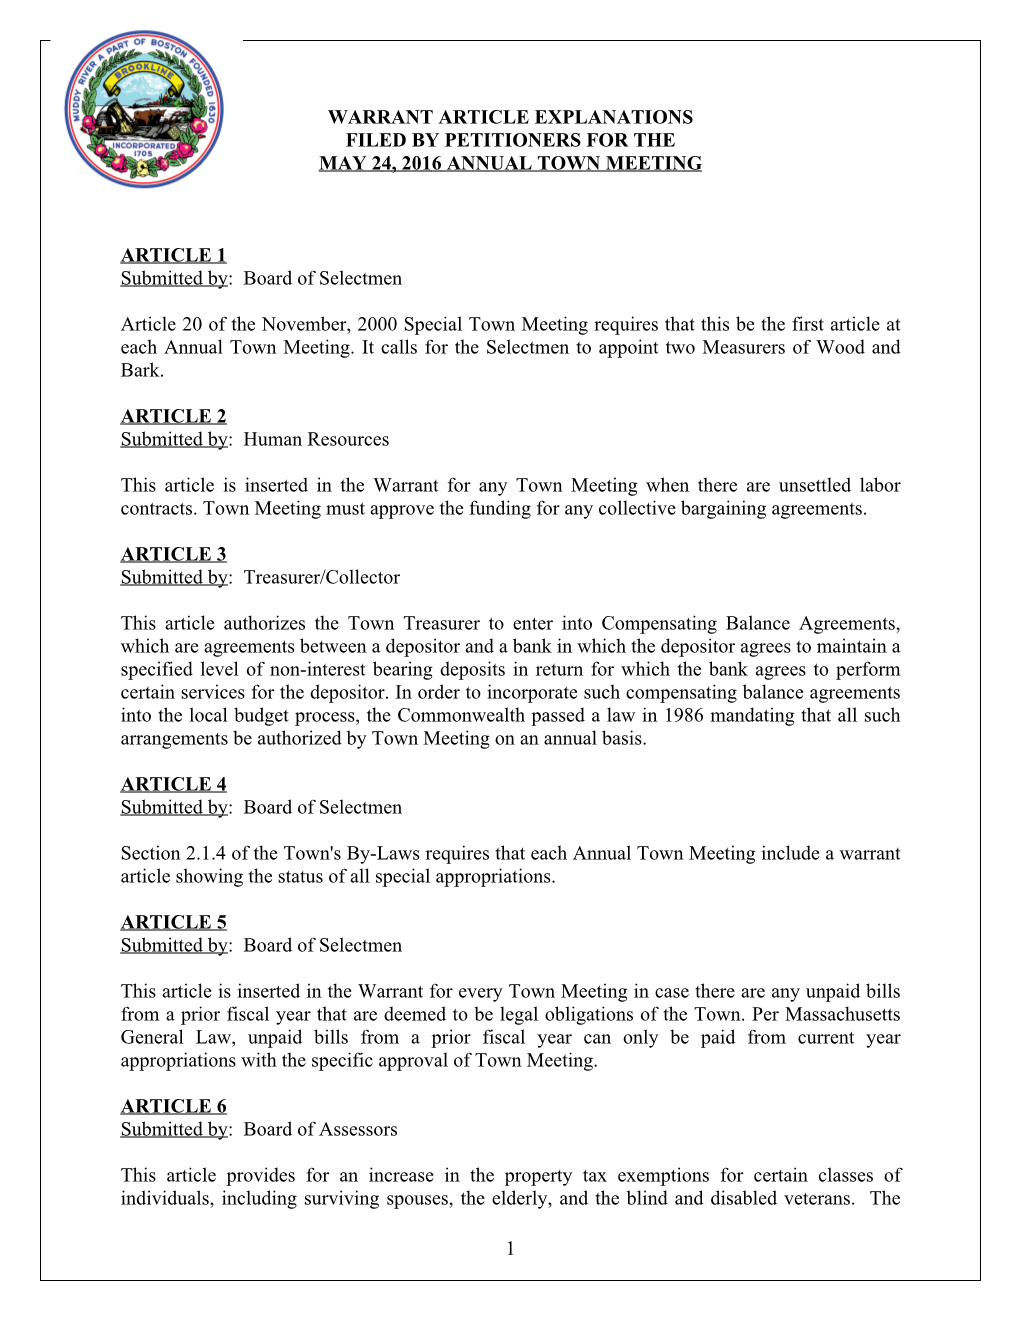 May 24, 2016 Annual Town Meeting Article Explanations (PDF)